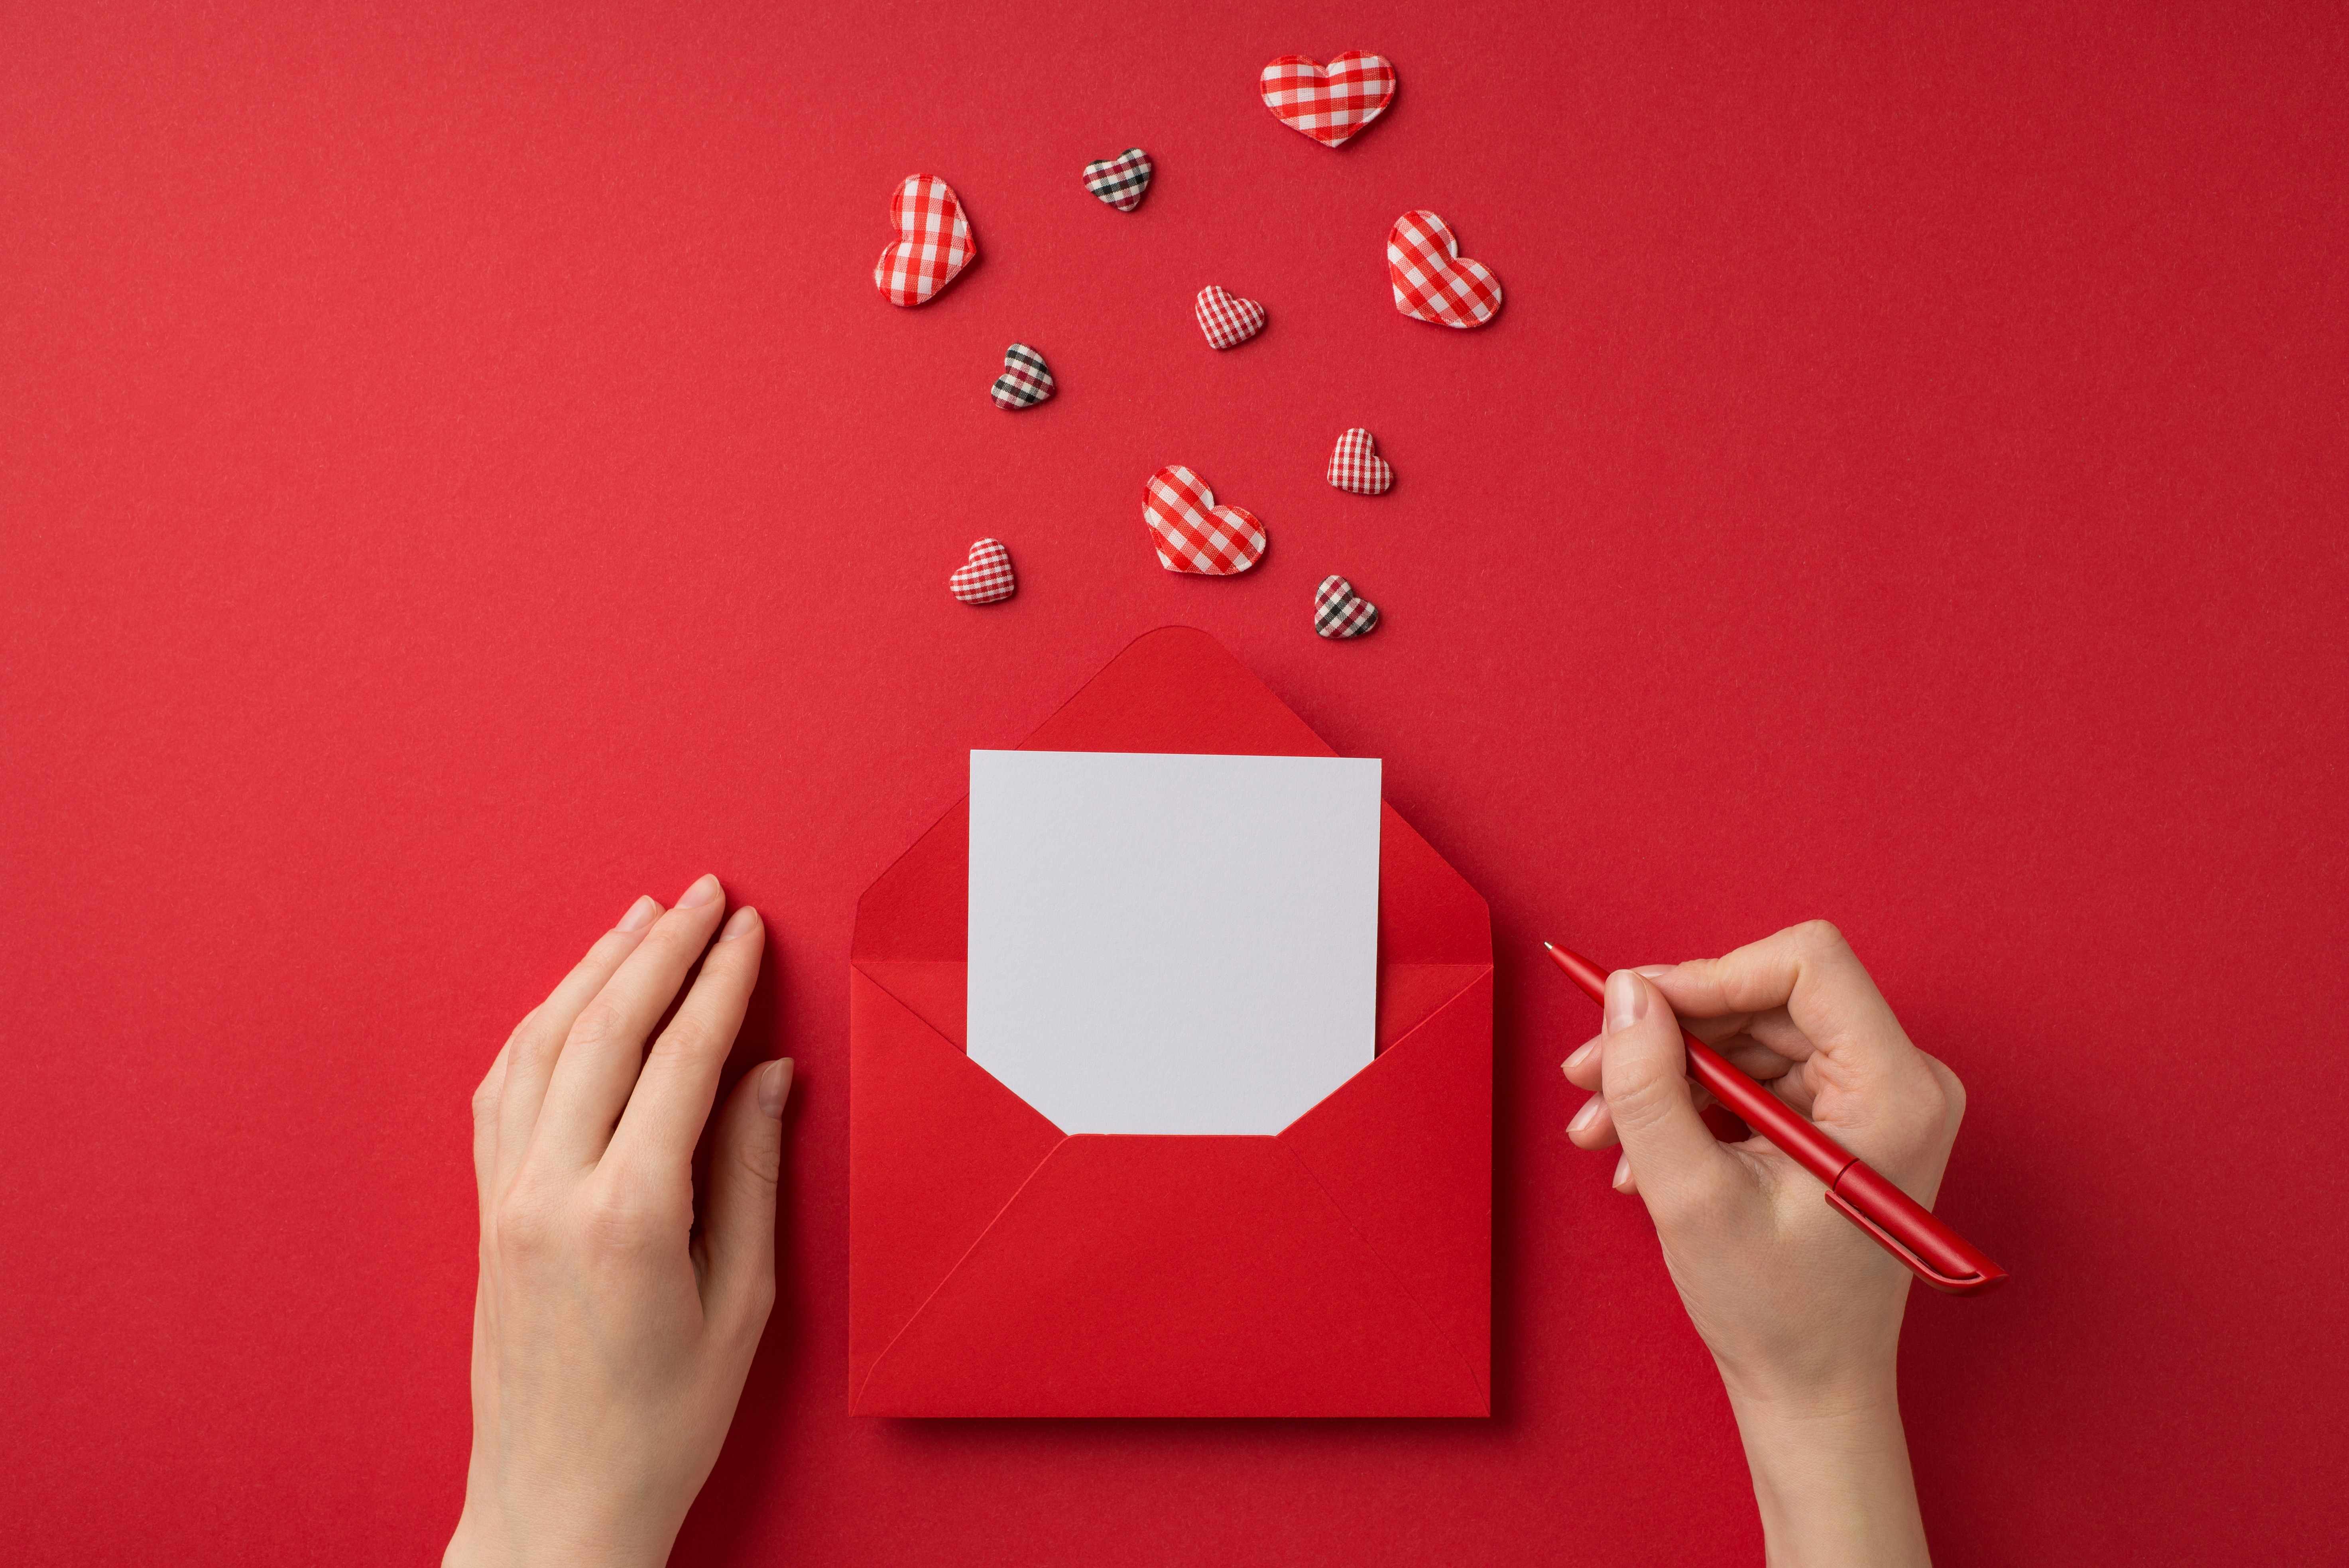 An invitation for a BabyQ inside a red envelope with gingham-patterned hearts for decoration